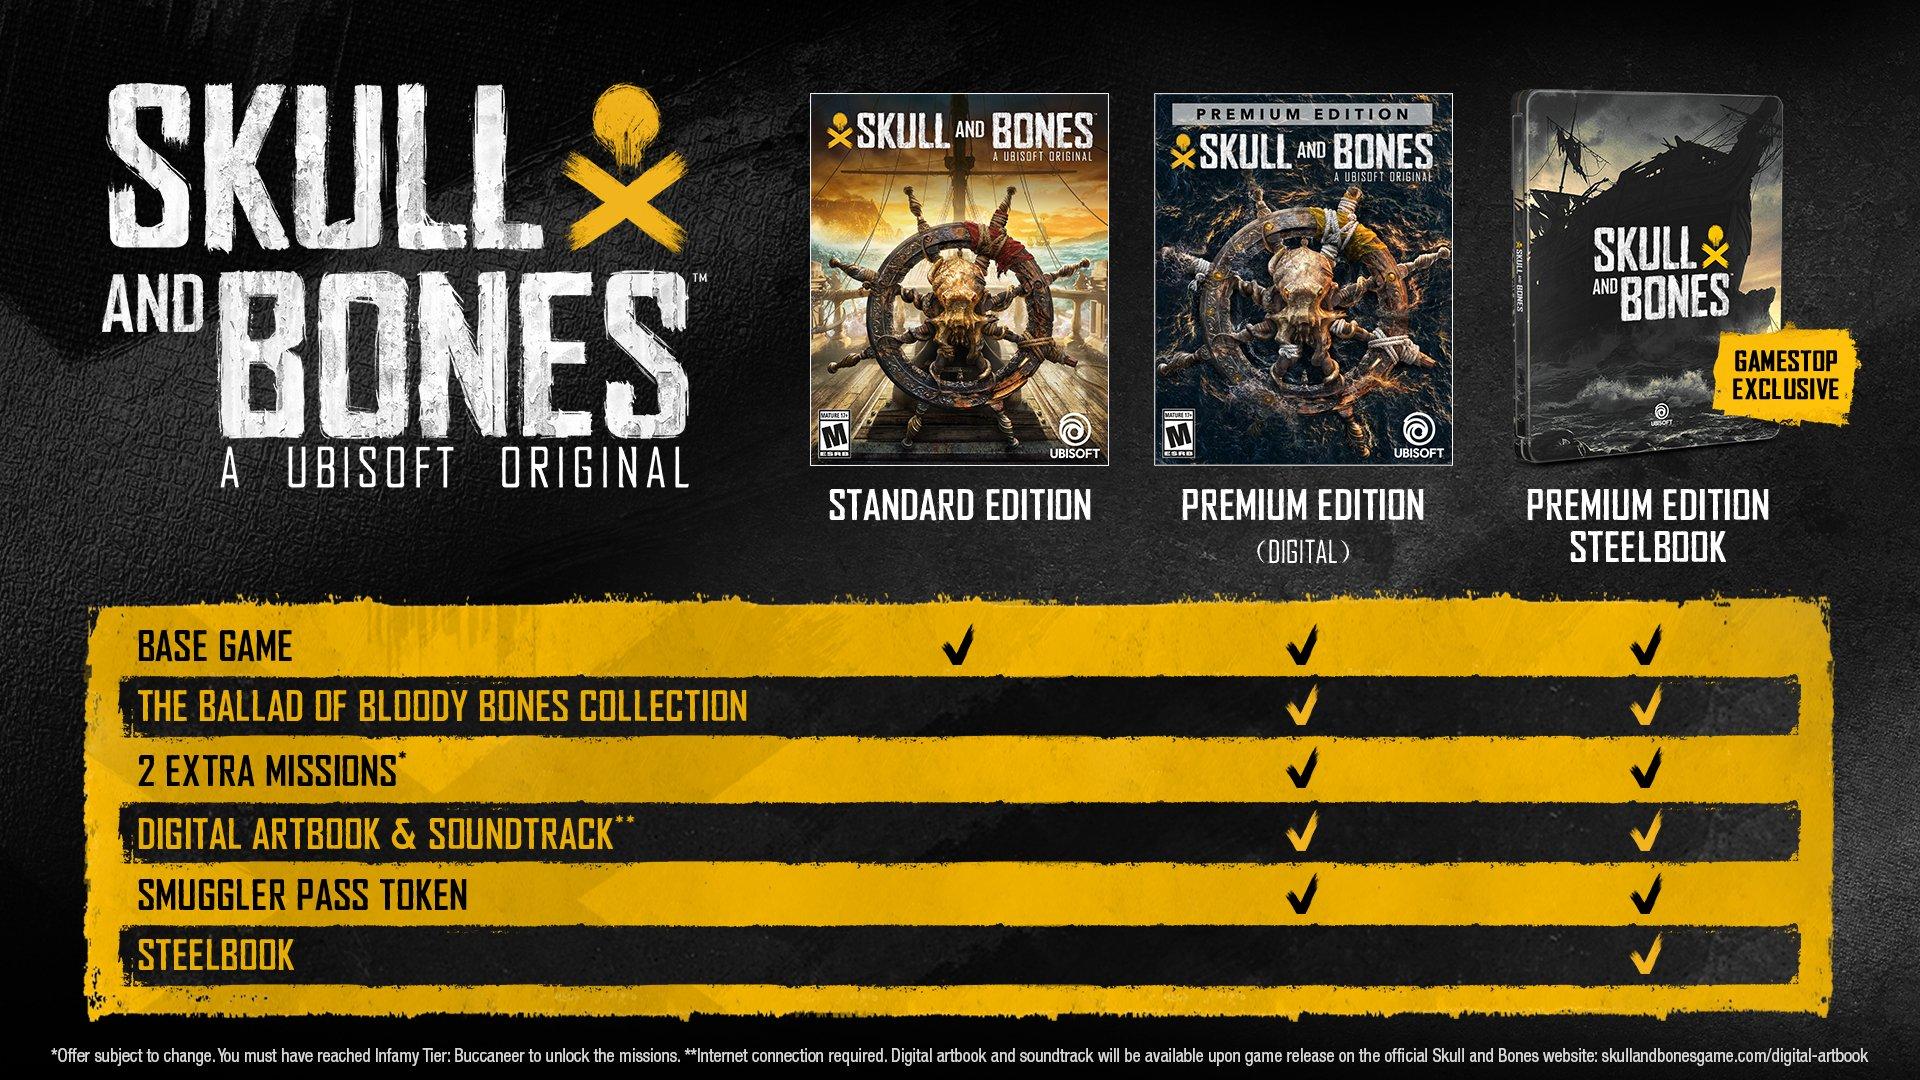 Skull and Bones Limited Edition PlayStation 5 UBP30602504 - Best Buy